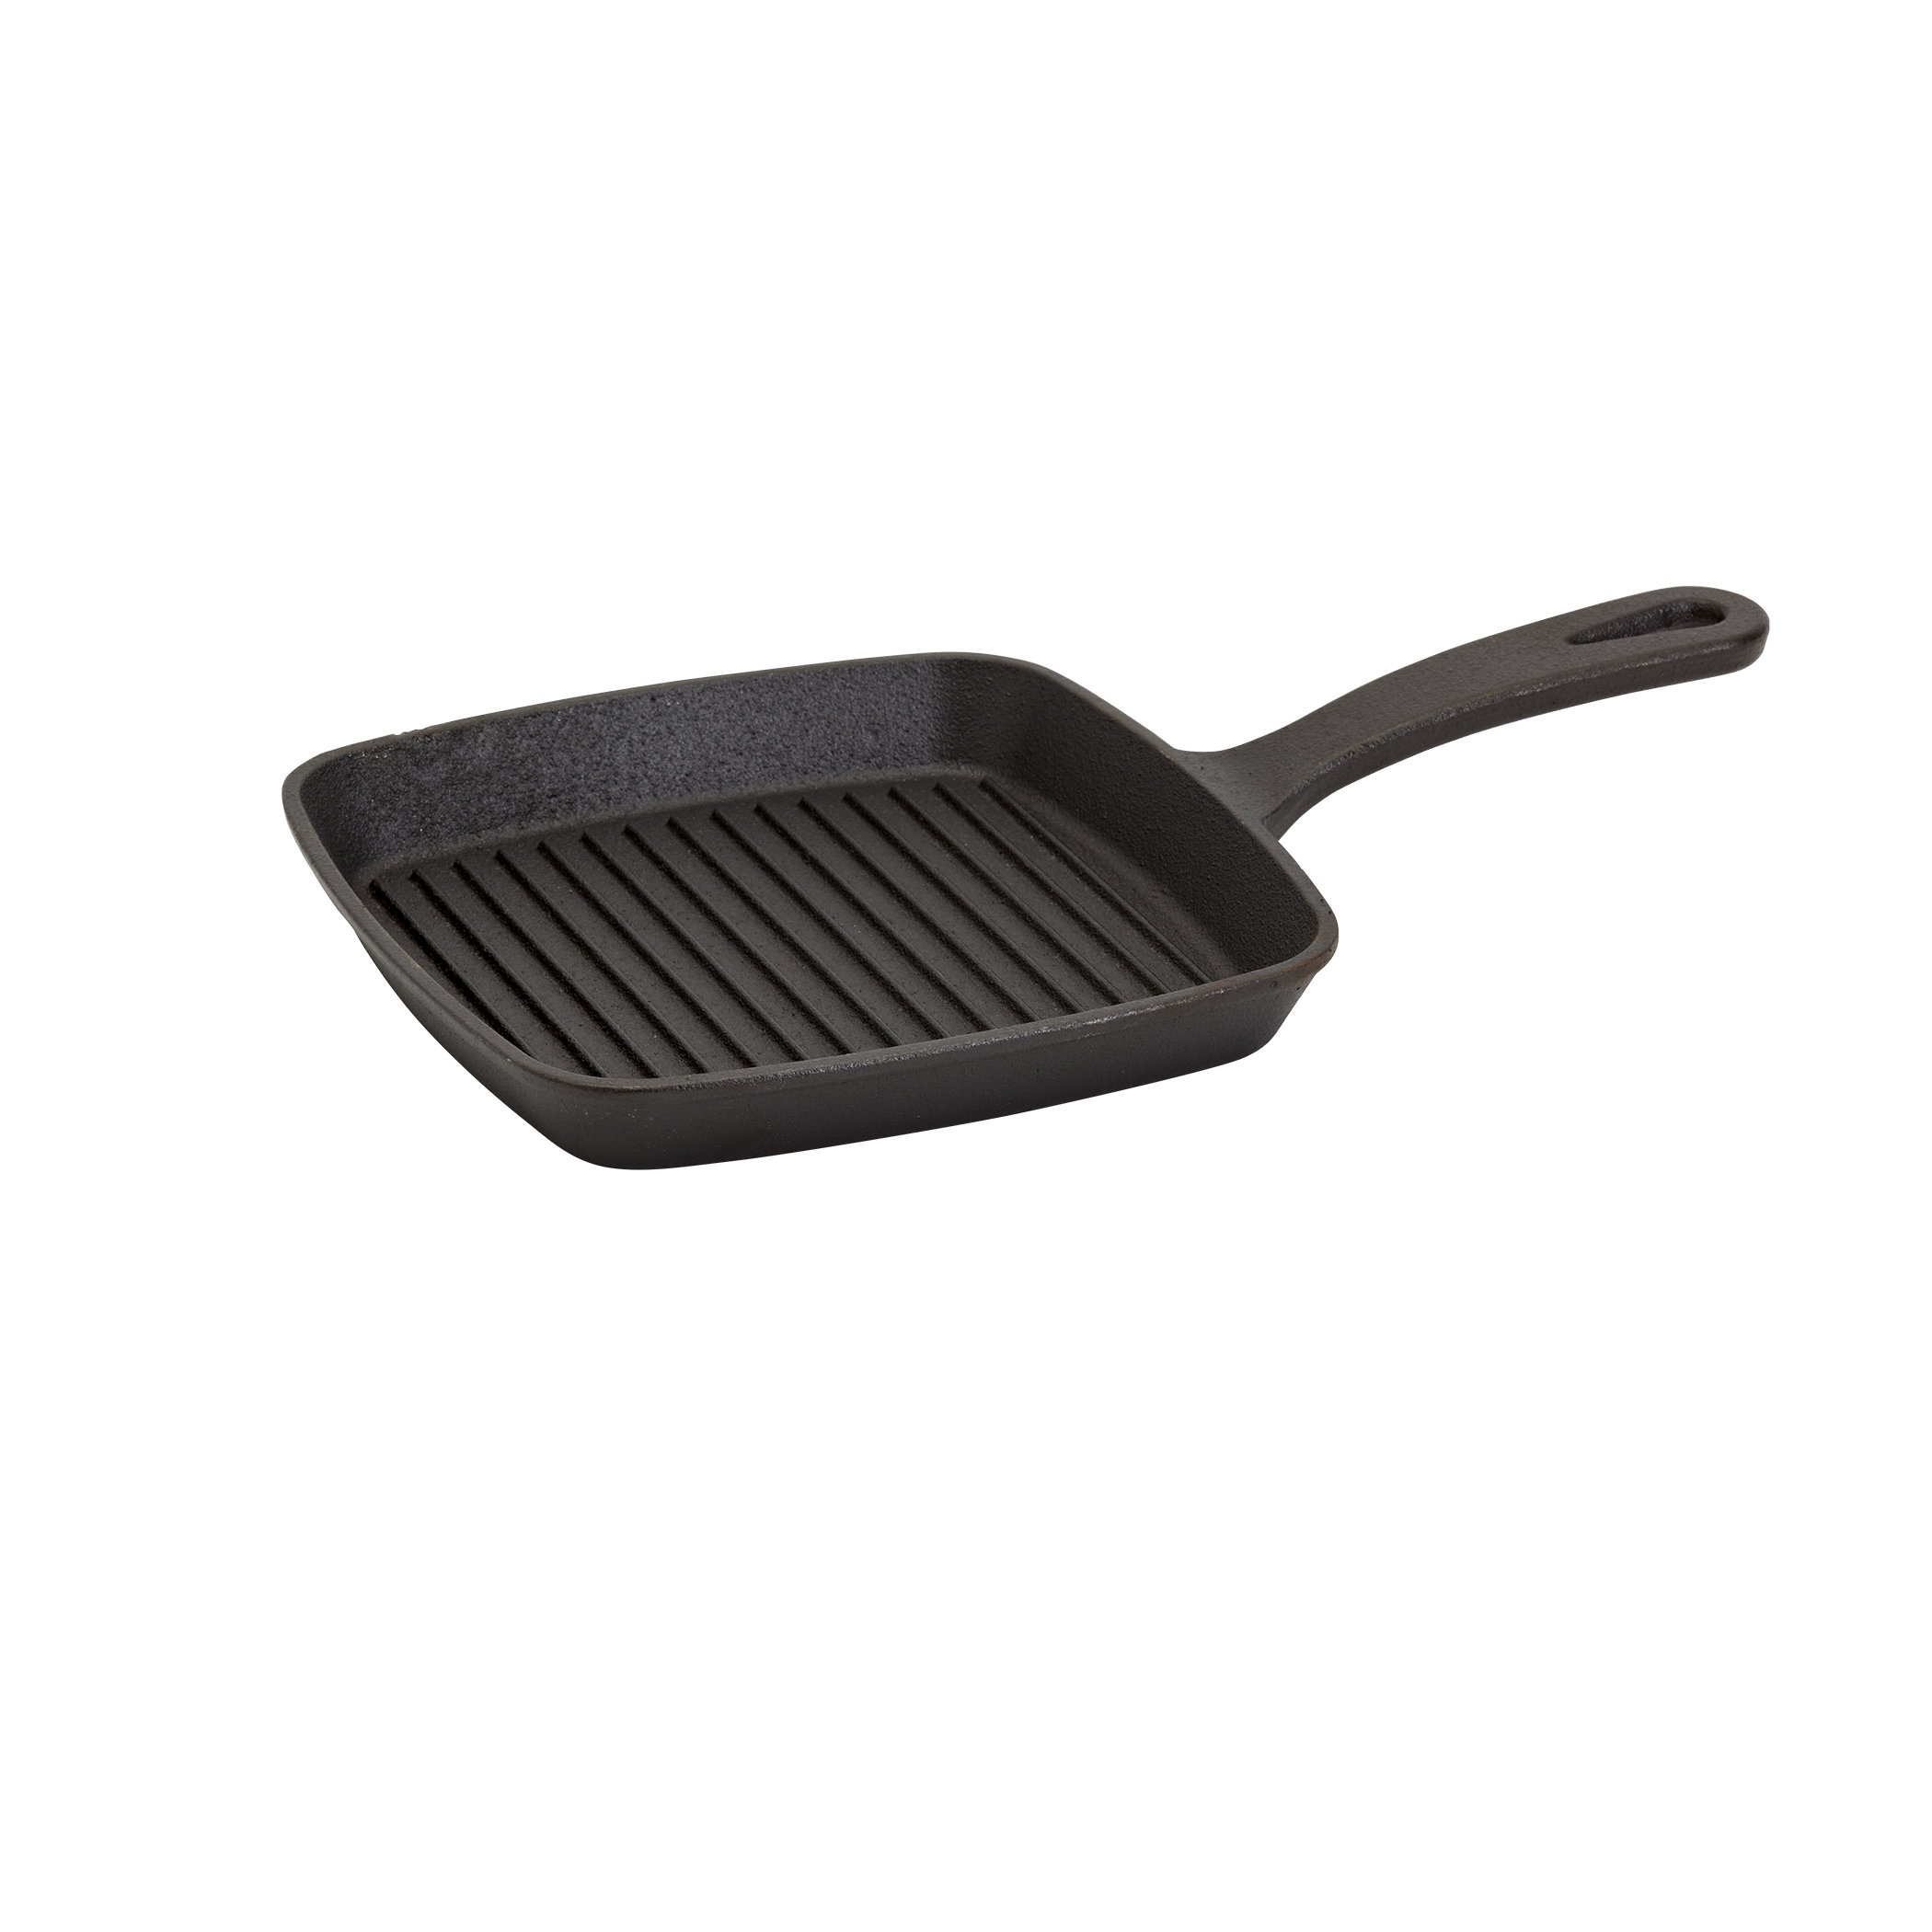 Cast Iron Square Grill Pan - 10.5 Inch